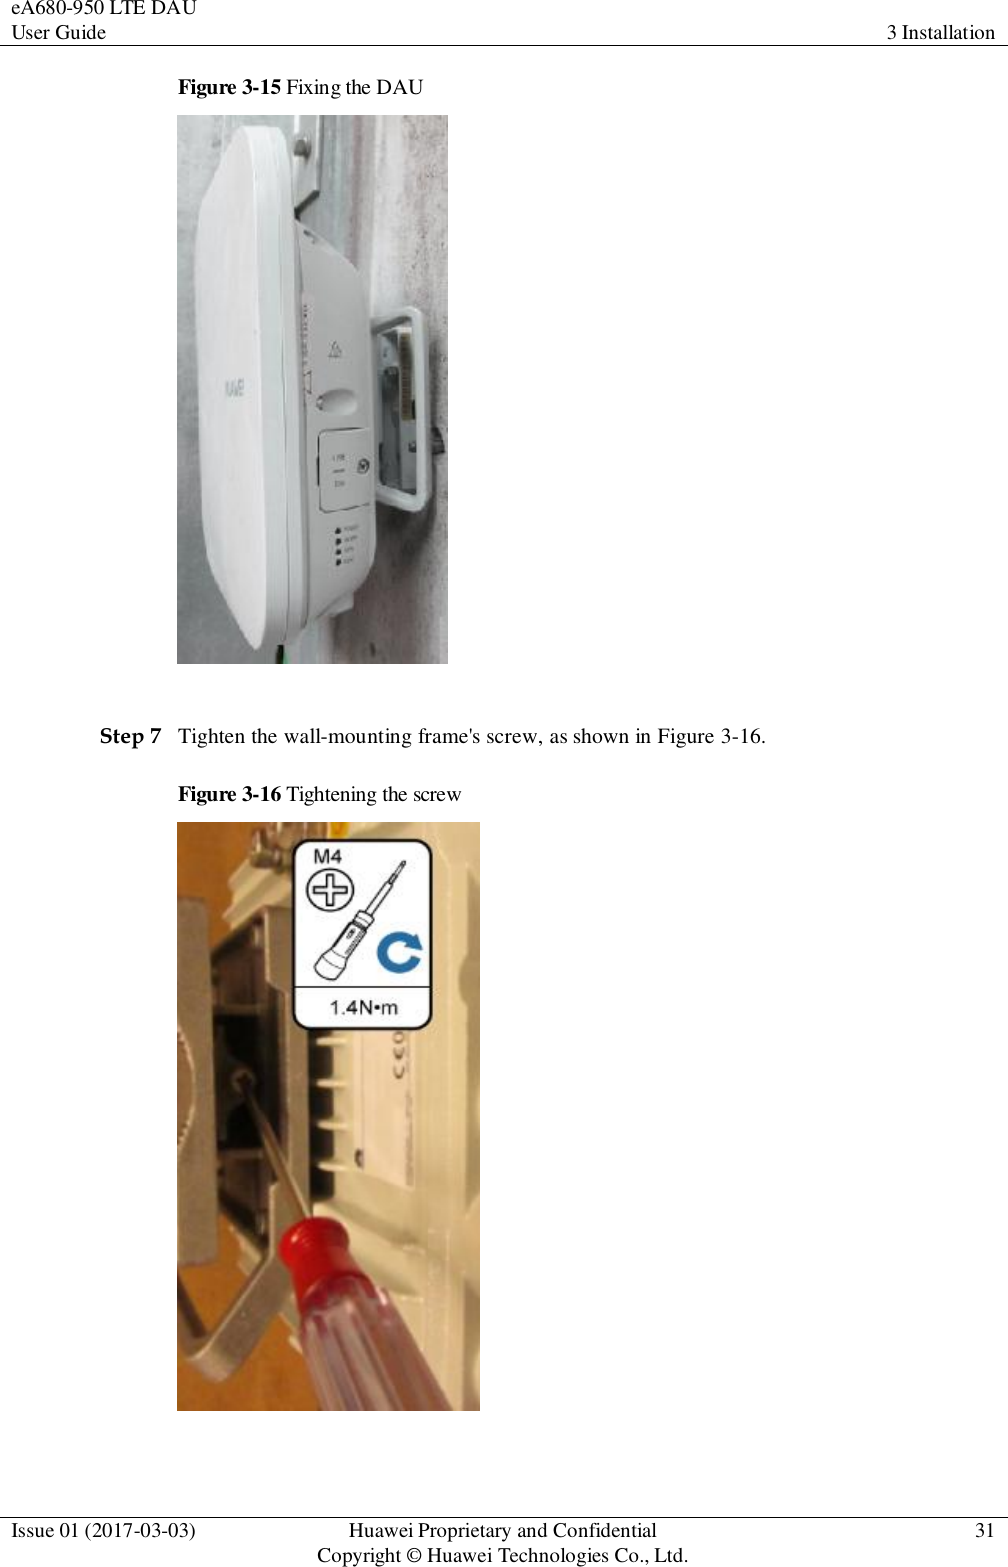 eA680-950 LTE DAU User Guide 3 Installation  Issue 01 (2017-03-03) Huawei Proprietary and Confidential                                     Copyright © Huawei Technologies Co., Ltd. 31  Figure 3-15 Fixing the DAU   Step 7 Tighten the wall-mounting frame&apos;s screw, as shown in Figure 3-16.   Figure 3-16 Tightening the screw   